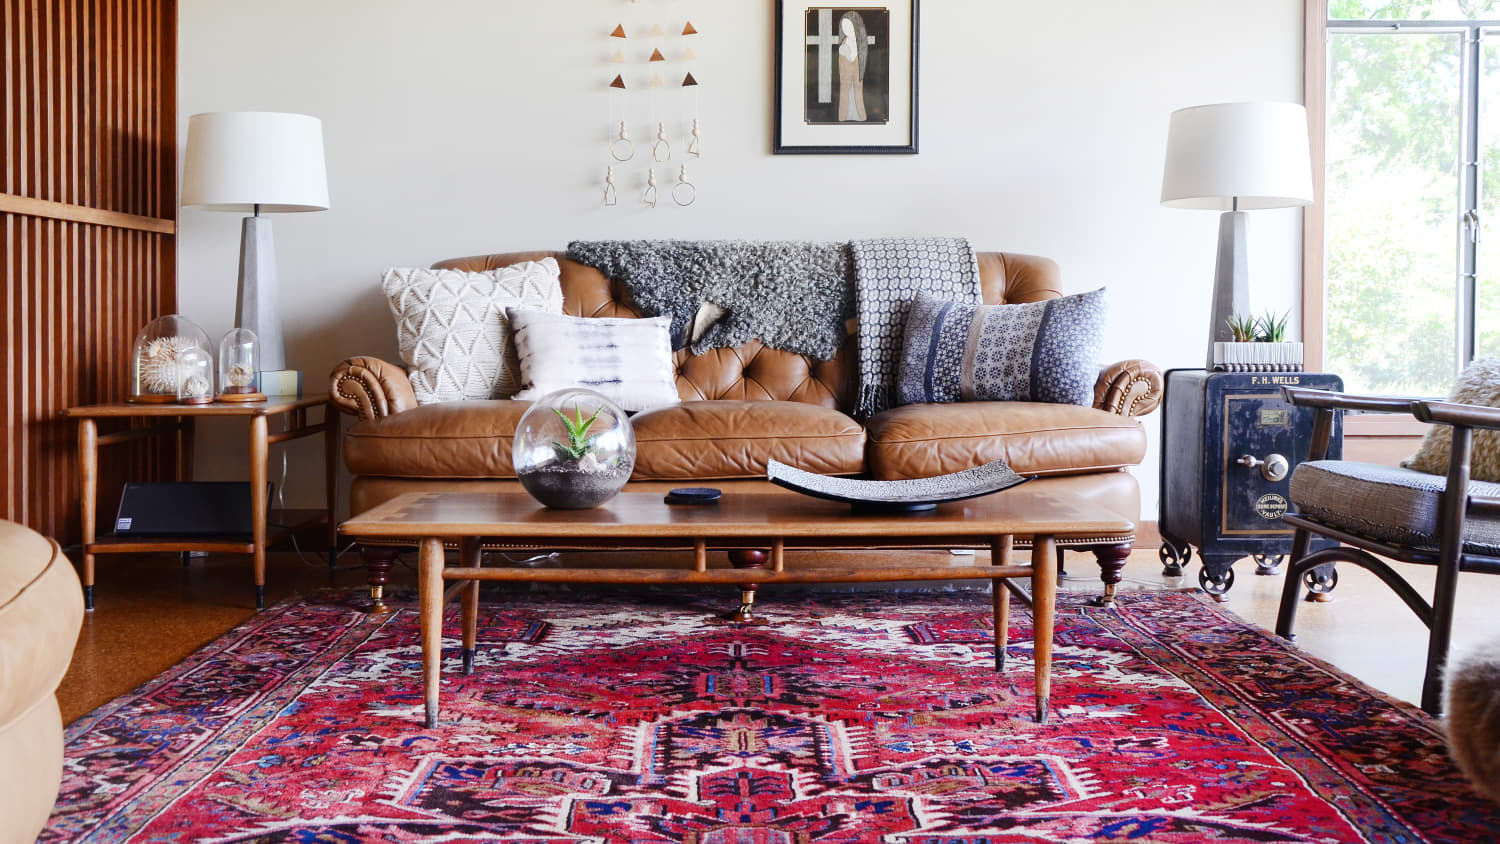 The $7 Hack That Helped My Handmade Rug Look Perfect